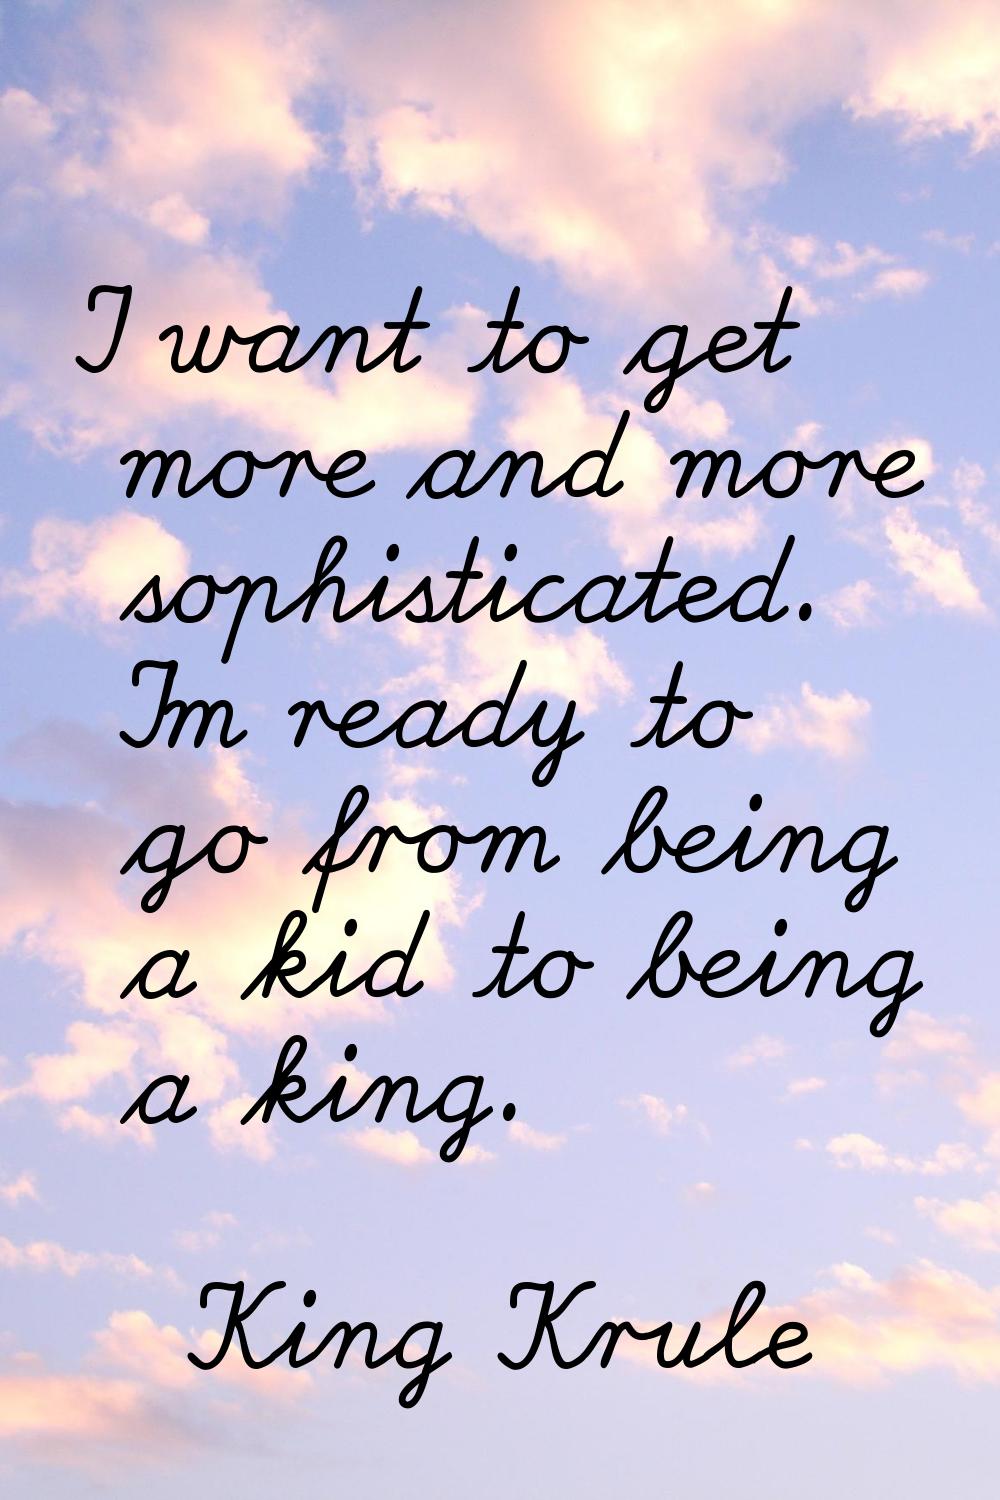 I want to get more and more sophisticated. I'm ready to go from being a kid to being a king.